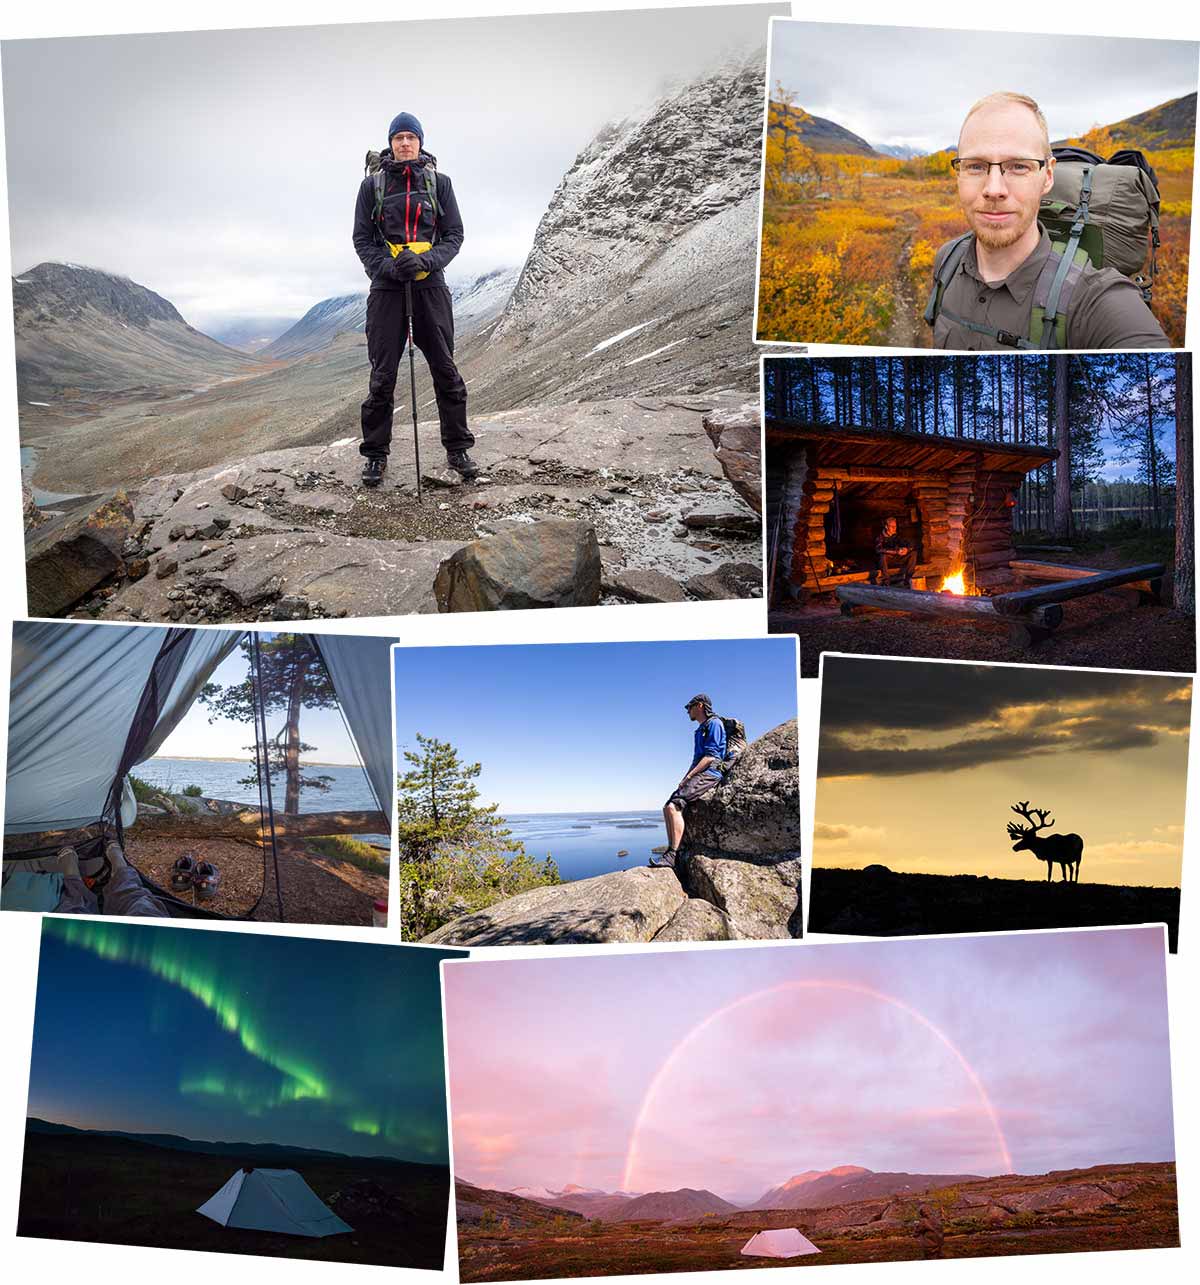 Adventures and hiking in nature, from Southern Finland to Lapland, in national parks and in wilderness. Finland, Sweden, Norway. Part 1 of 2.